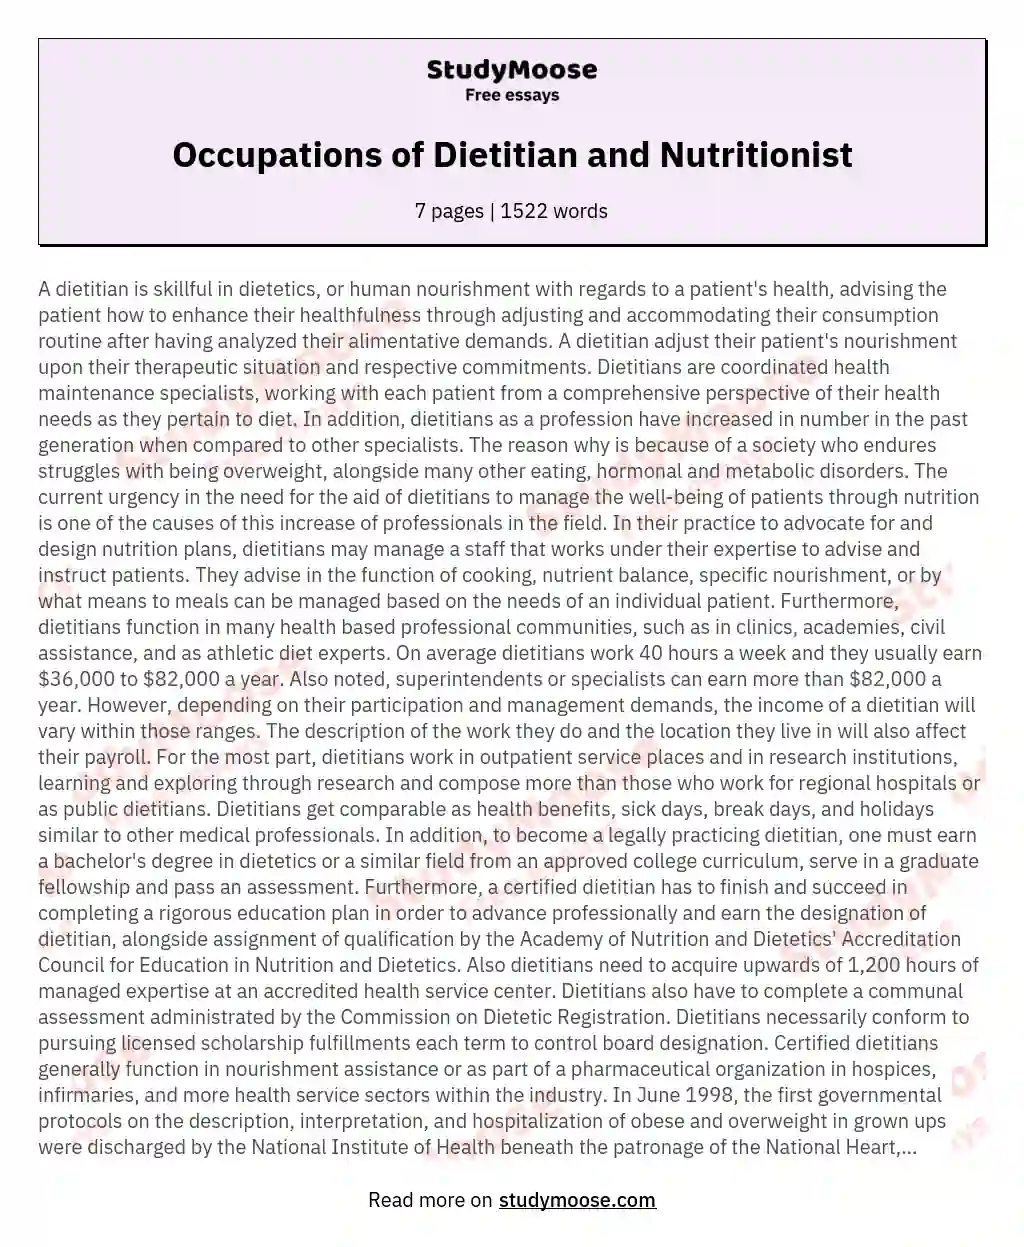 Occupations of Dietitian and Nutritionist essay